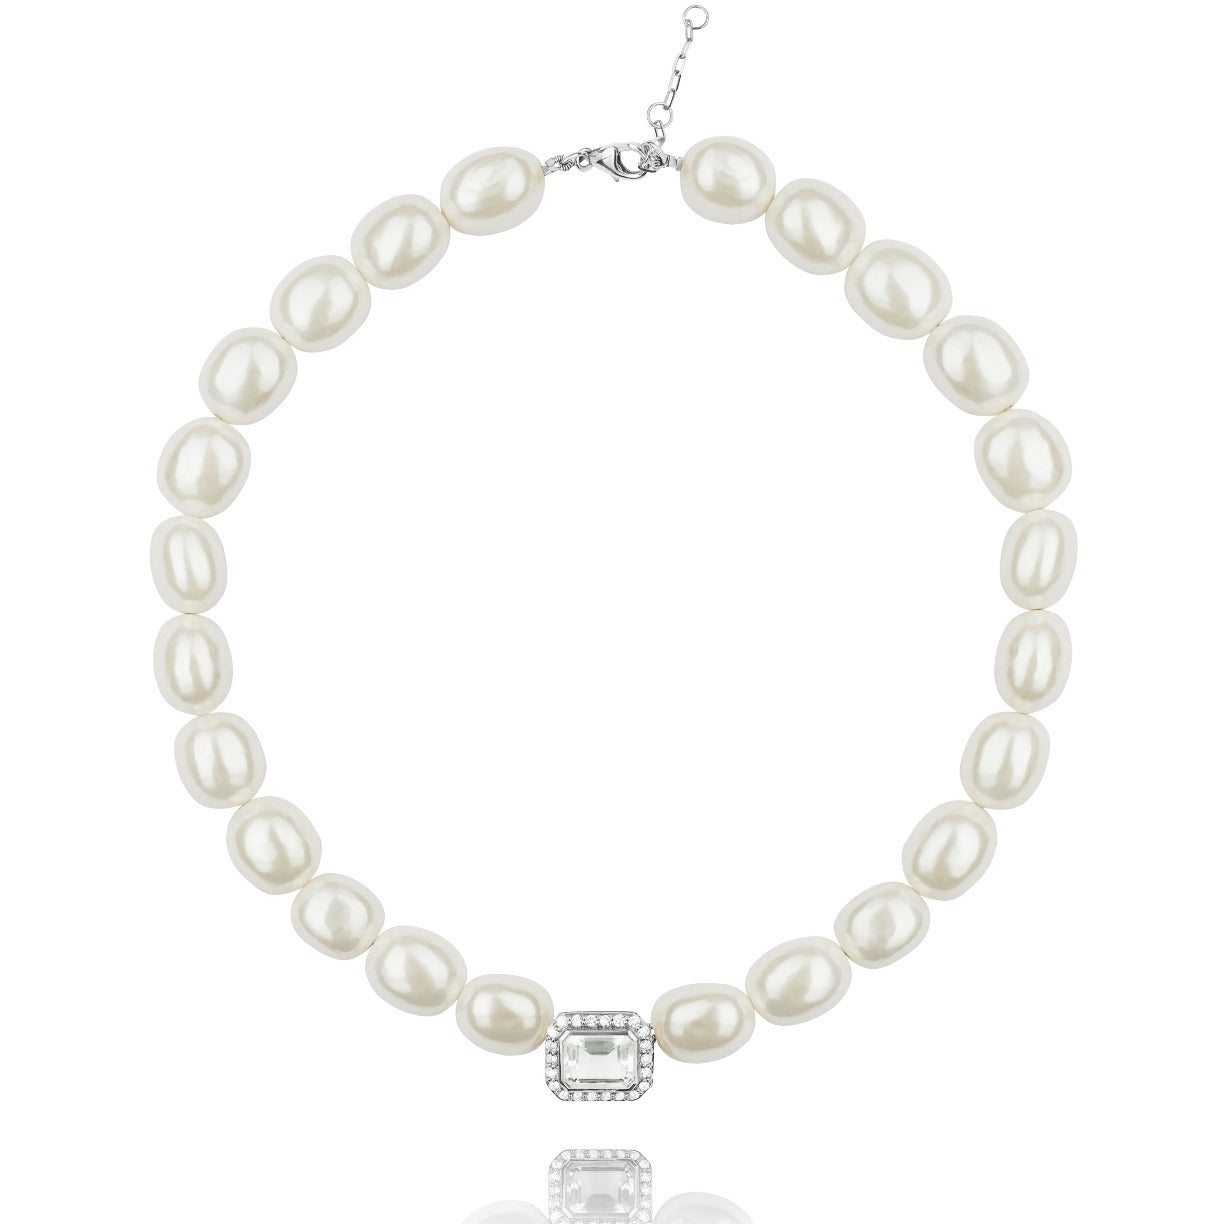 Molly necklace with white shell beads and silver